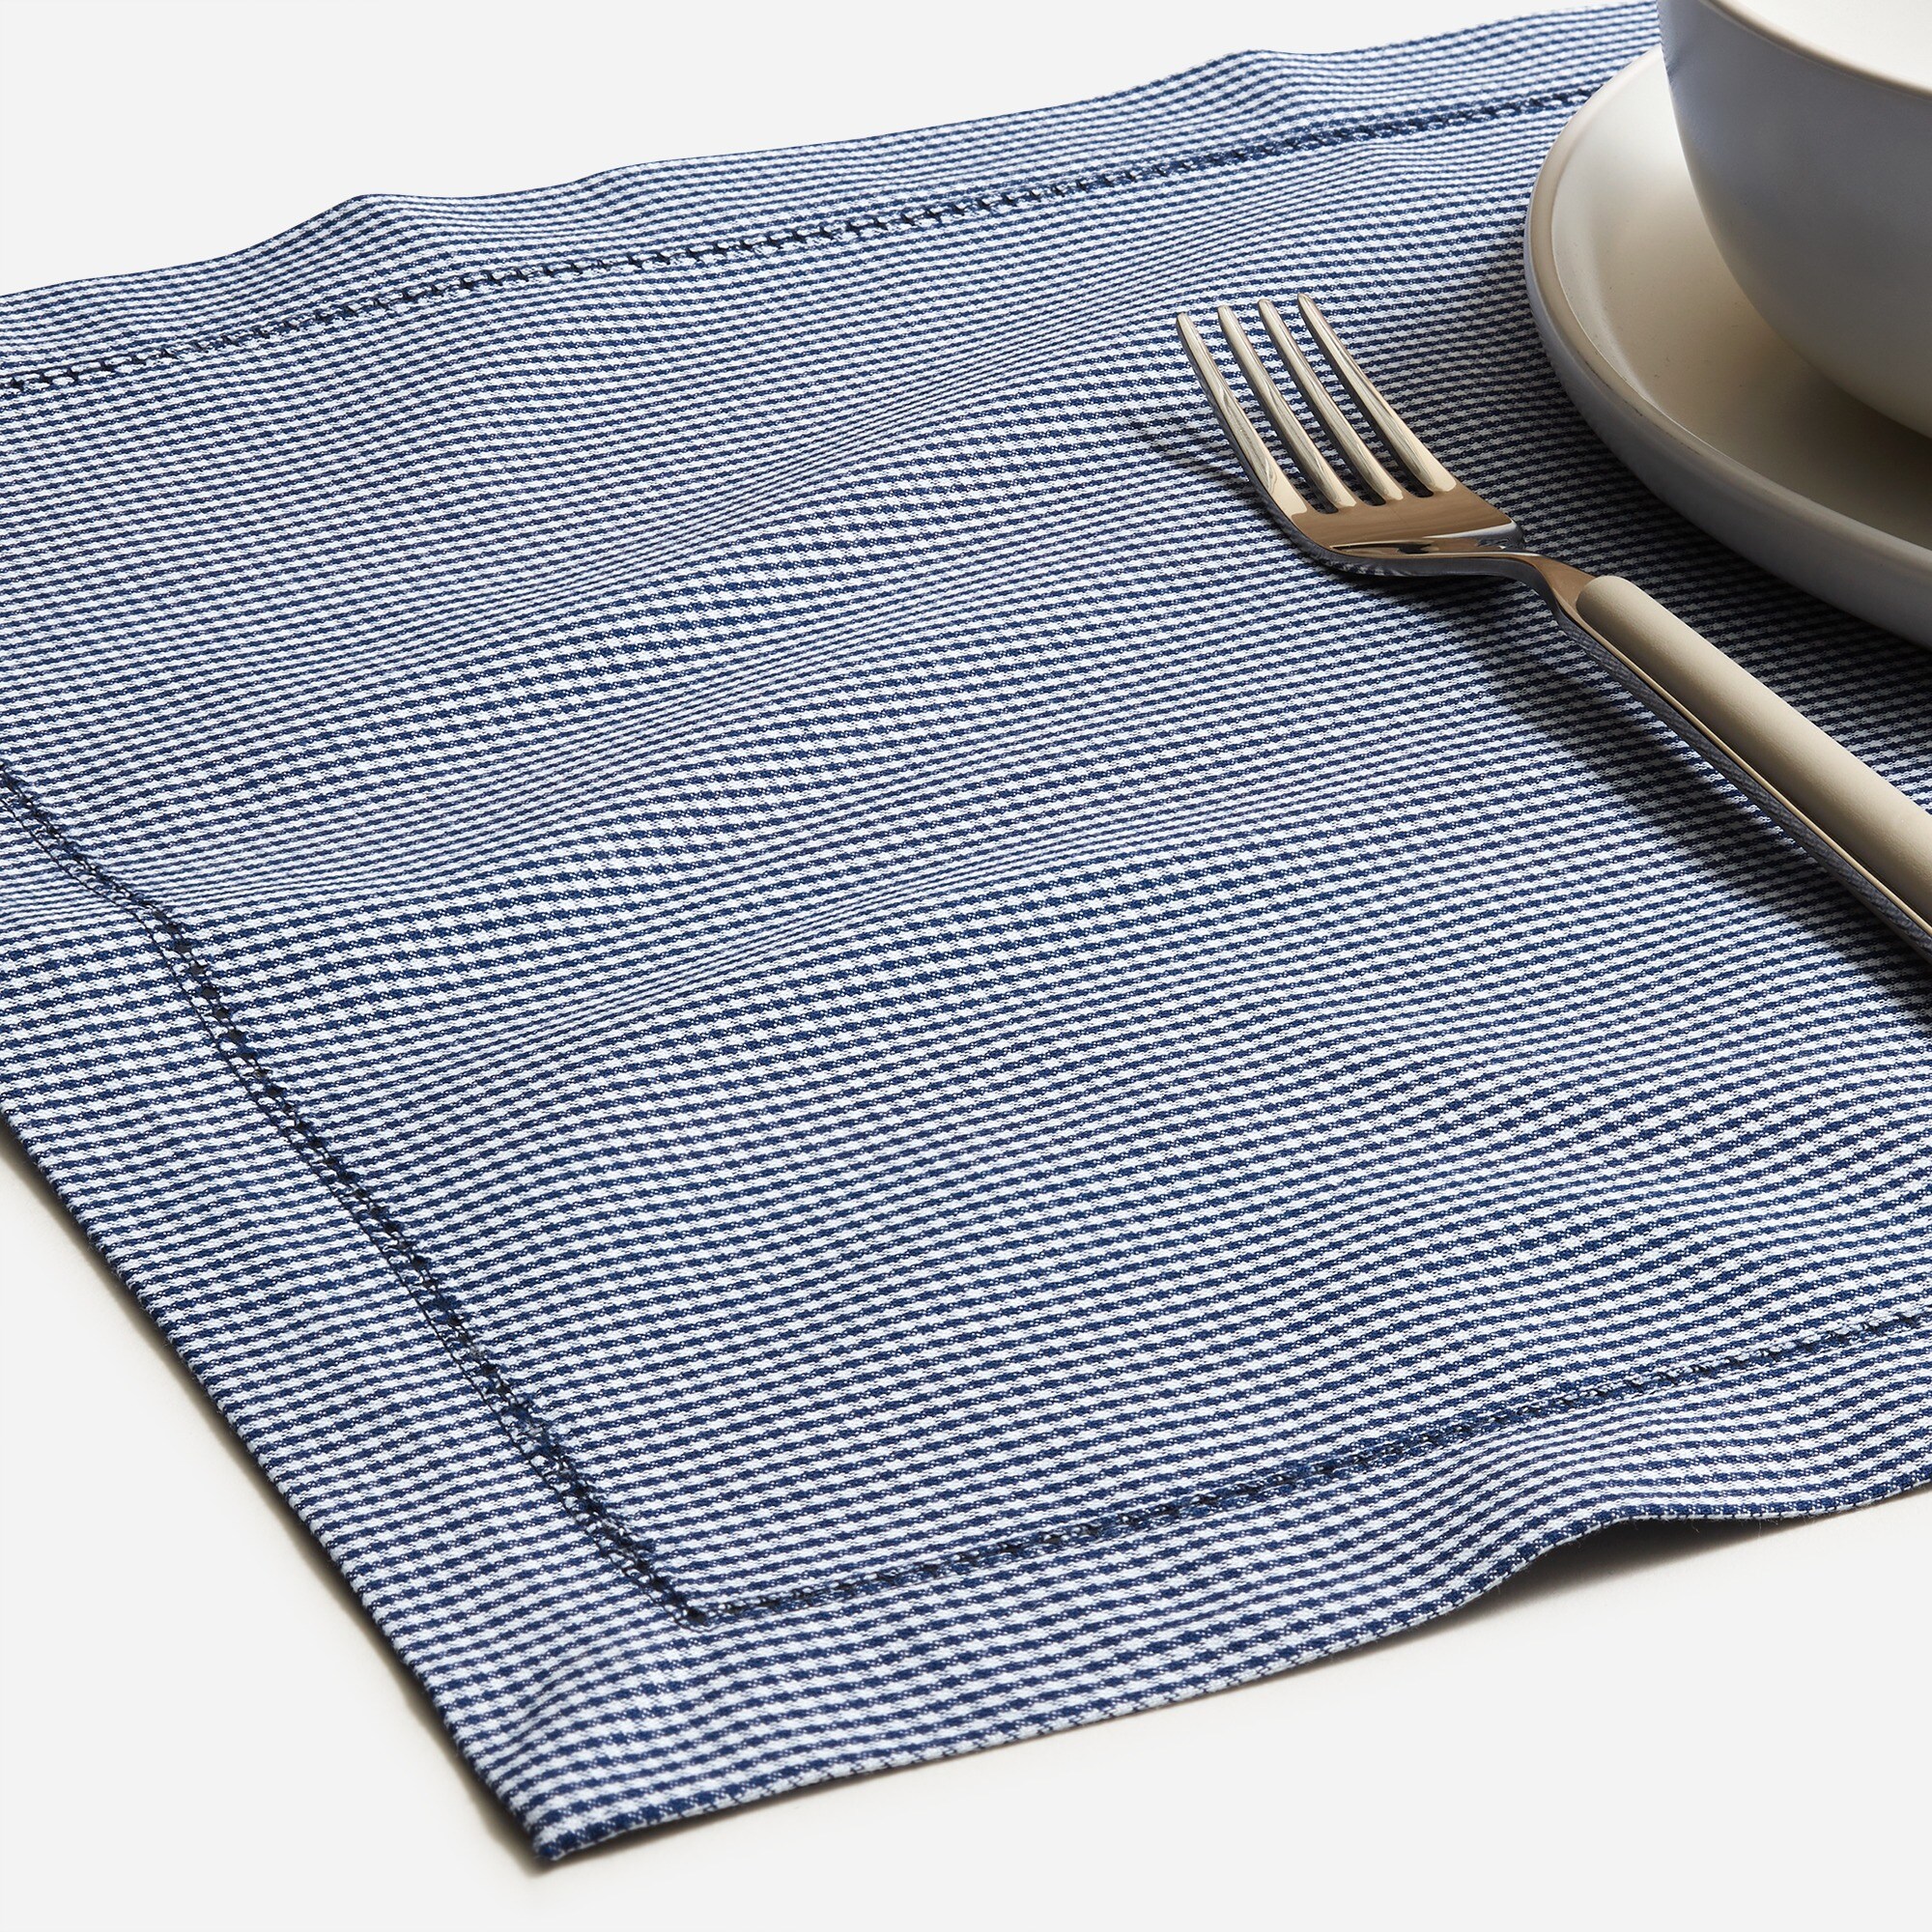 homes Set-of-four place mats in heritage microgingham